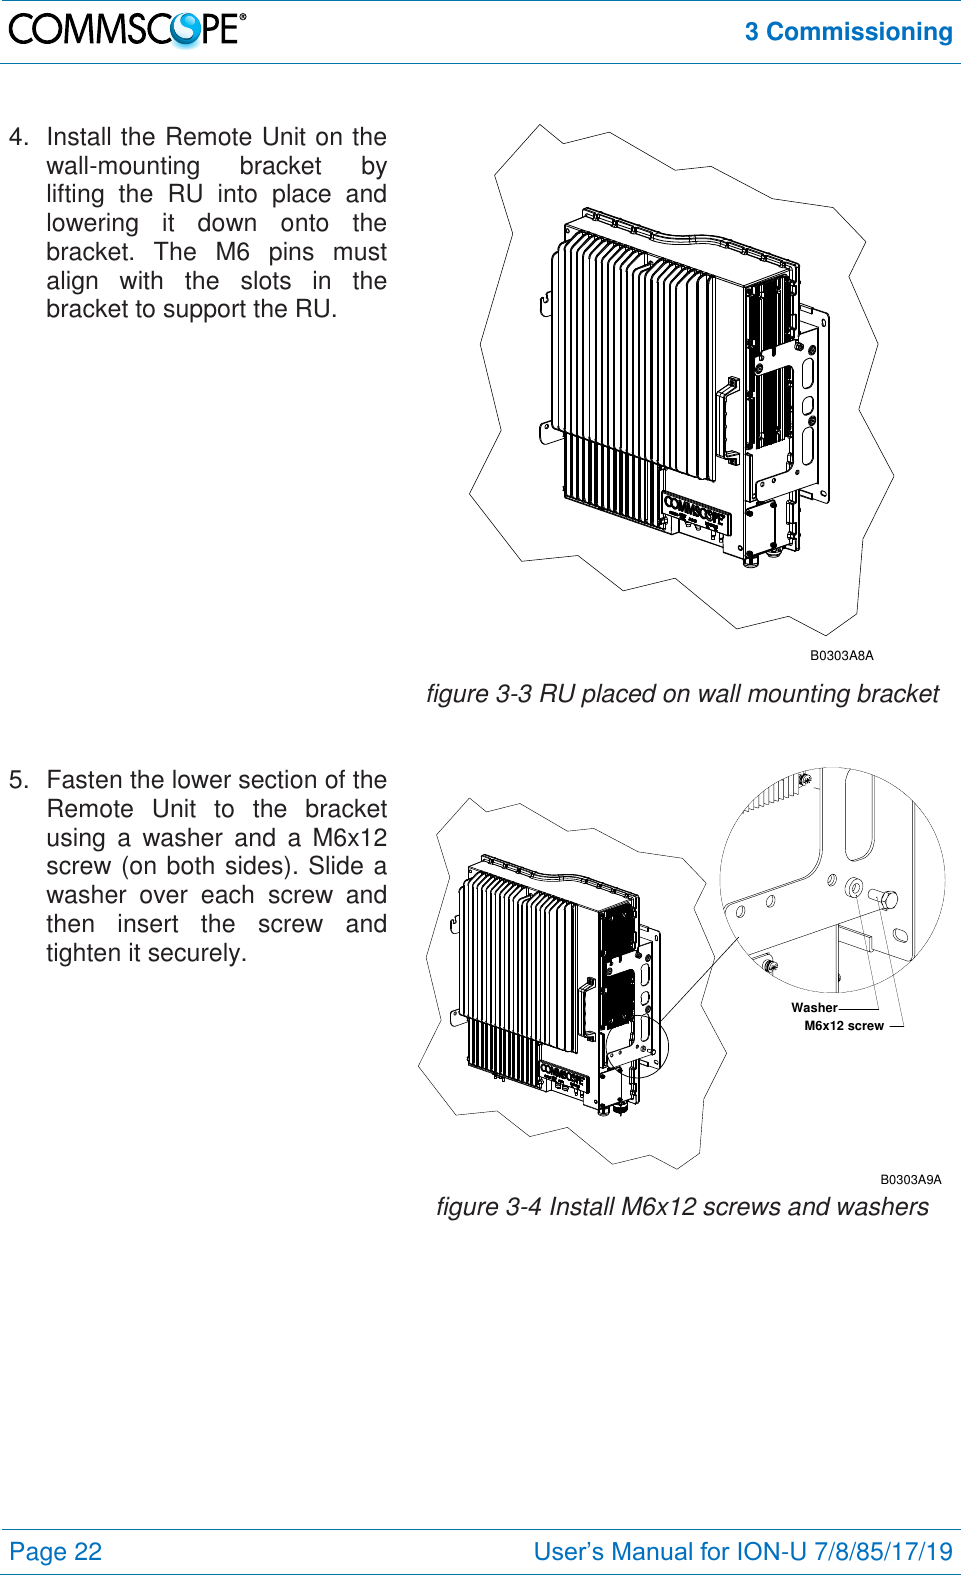  3 Commissioning  Page 22 User’s Manual for ION-U 7/8/85/17/19  4.  Install the Remote Unit on the wall-mounting  bracket  by lifting  the  RU  into  place  and lowering  it  down  onto  the bracket.  The  M6  pins  must align  with  the  slots  in  the bracket to support the RU. B0303A8A figure 3-3 RU placed on wall mounting bracket 5.  Fasten the lower section of the Remote  Unit  to  the  bracket using  a  washer  and  a  M6x12 screw (on both sides). Slide a washer  over  each  screw  and then  insert  the  screw  and tighten it securely. M6x12 screwWasherB0303A9A figure 3-4 Install M6x12 screws and washers 